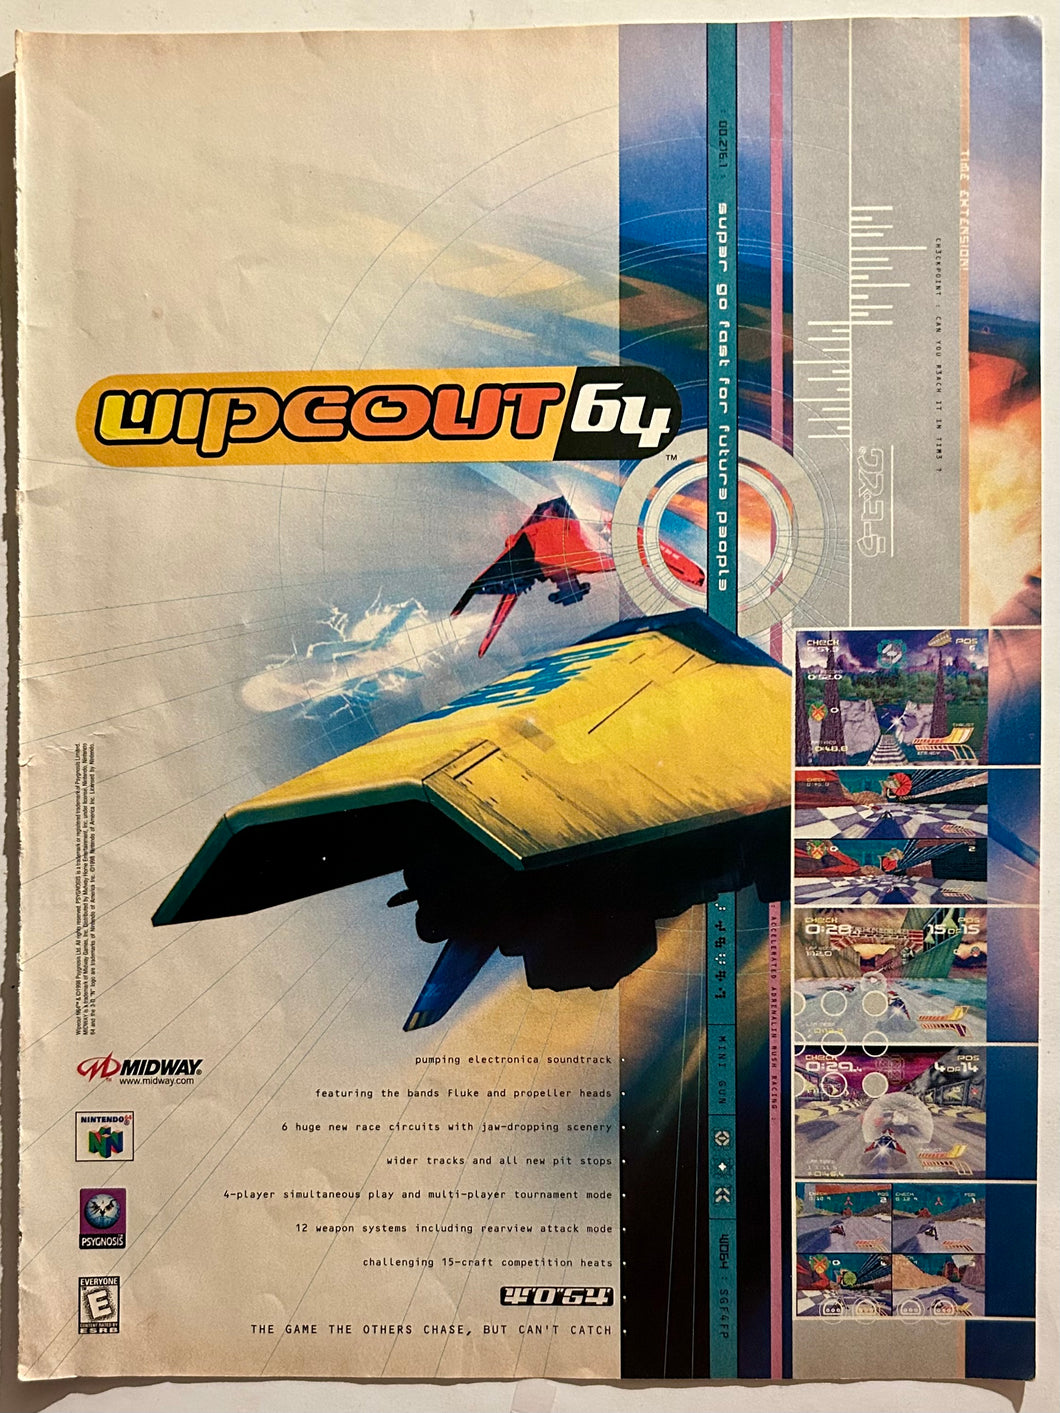 Wipeout 64 - N64 - Original Vintage Advertisement - Print Ads - Laminated A4 Poster